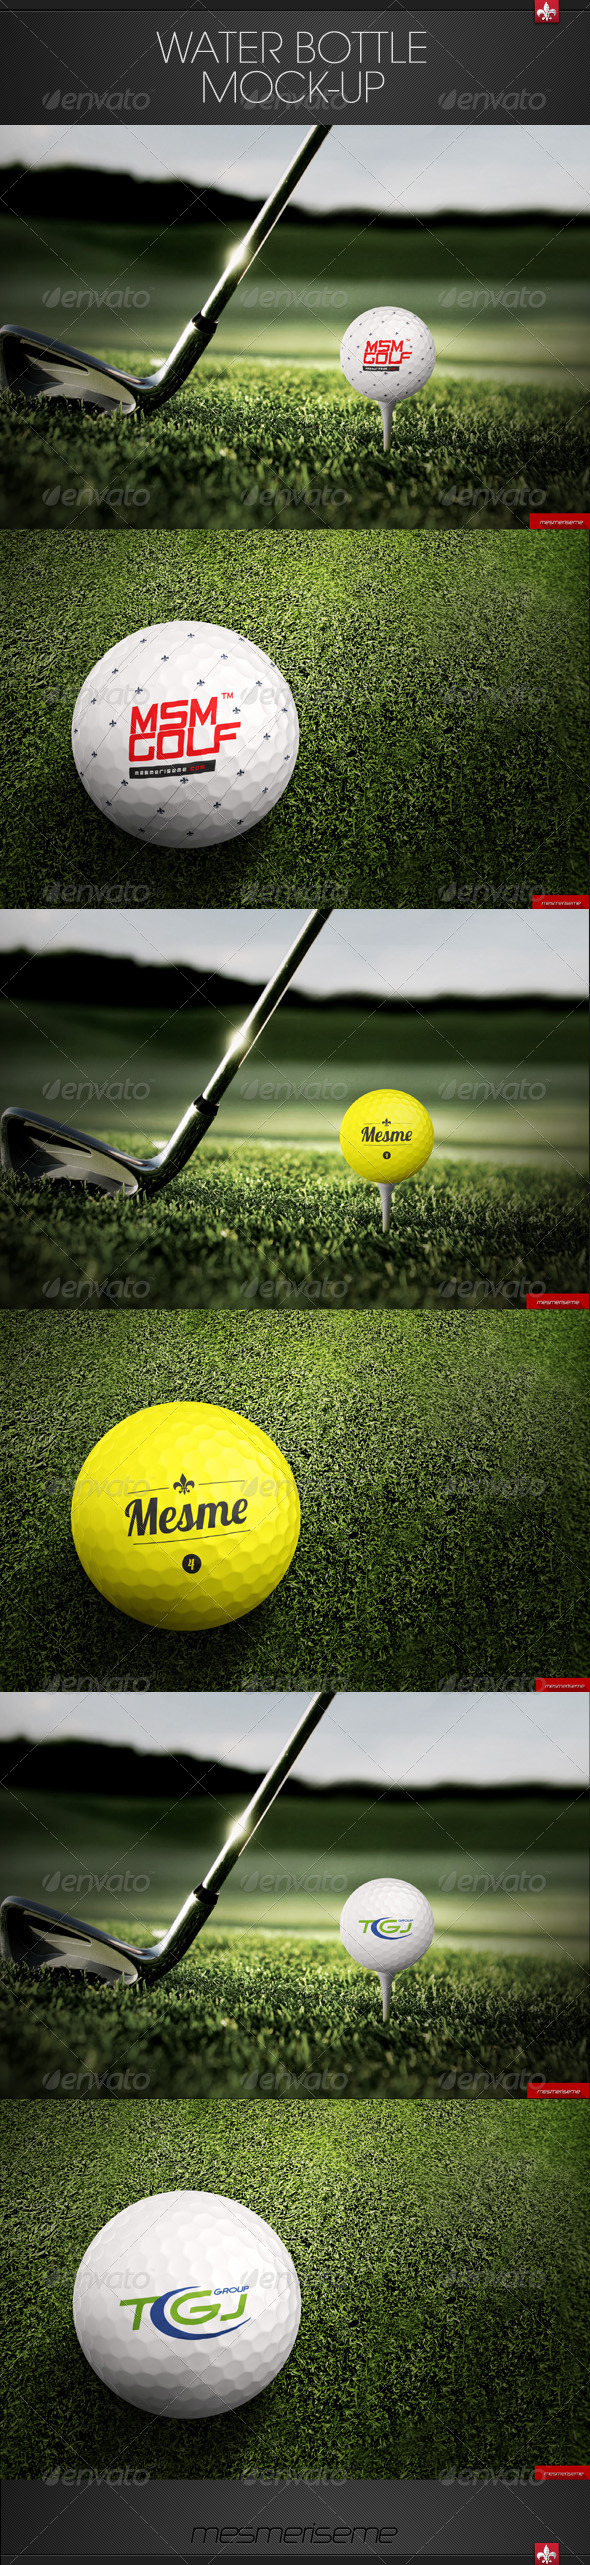 Download Stock Graphic - GraphicRiver Golf Ball Mock-up 7492600 ...